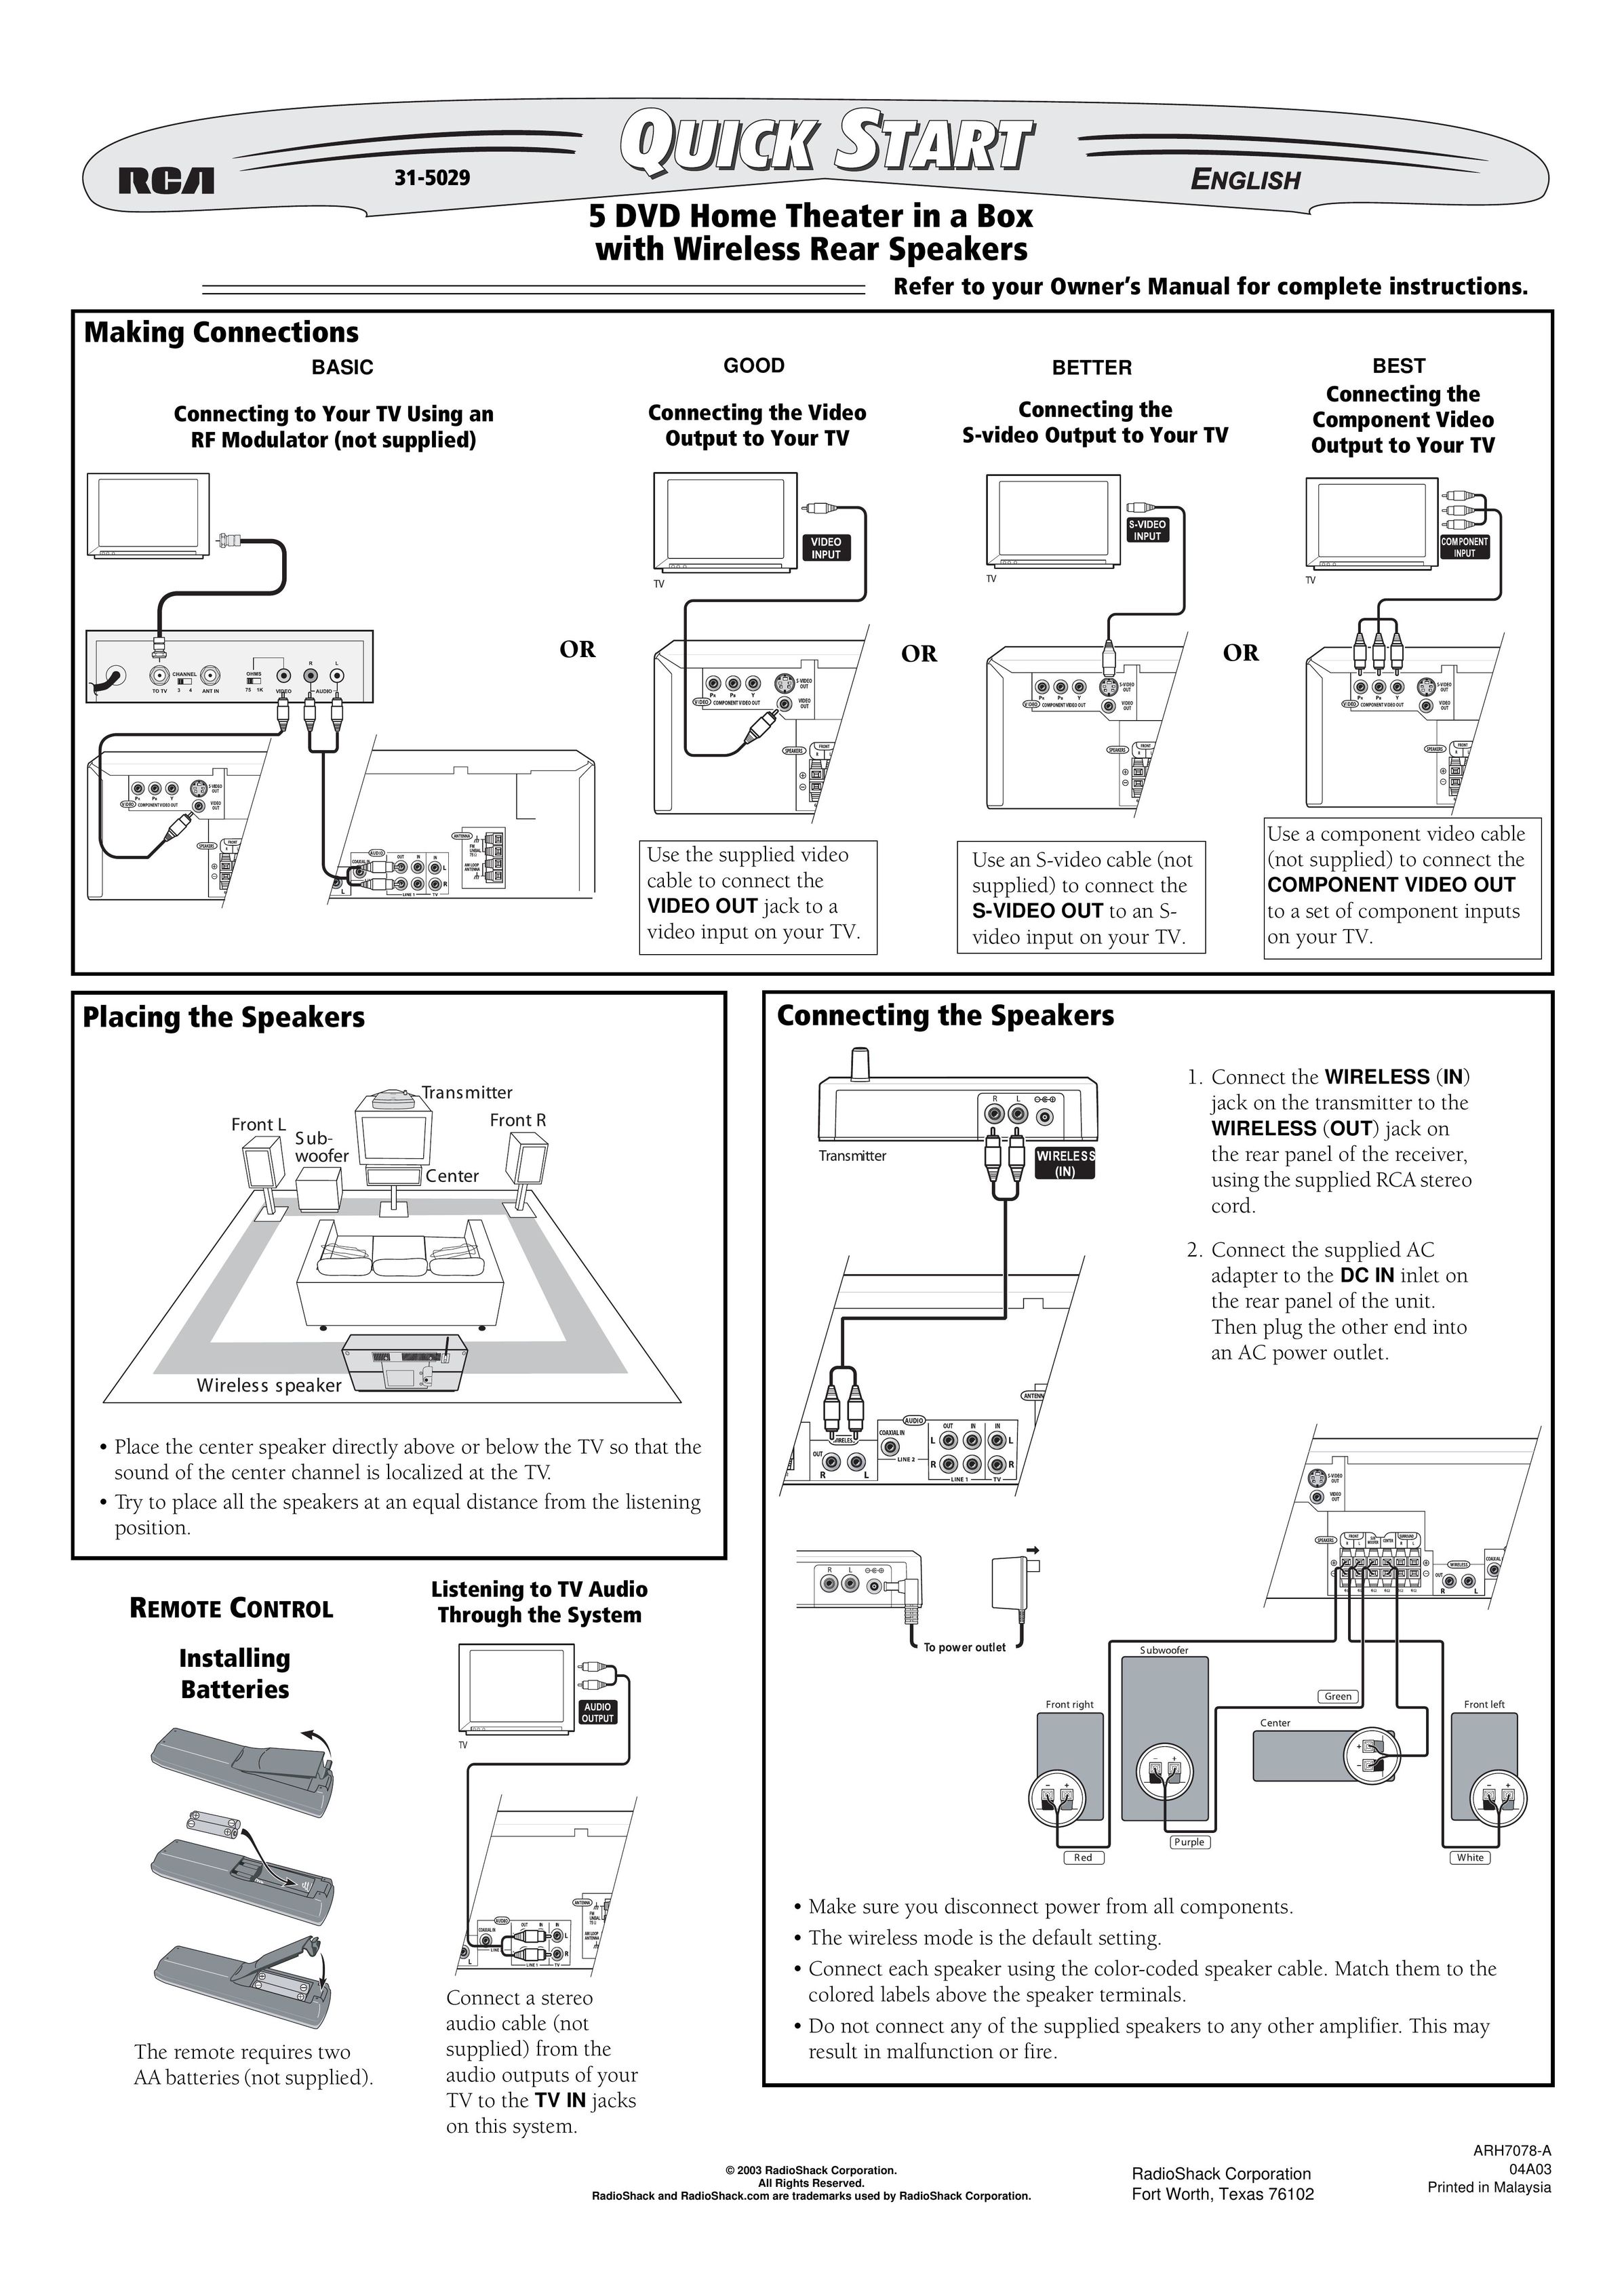 Radio Shack ARH7078-A Home Theater System User Manual